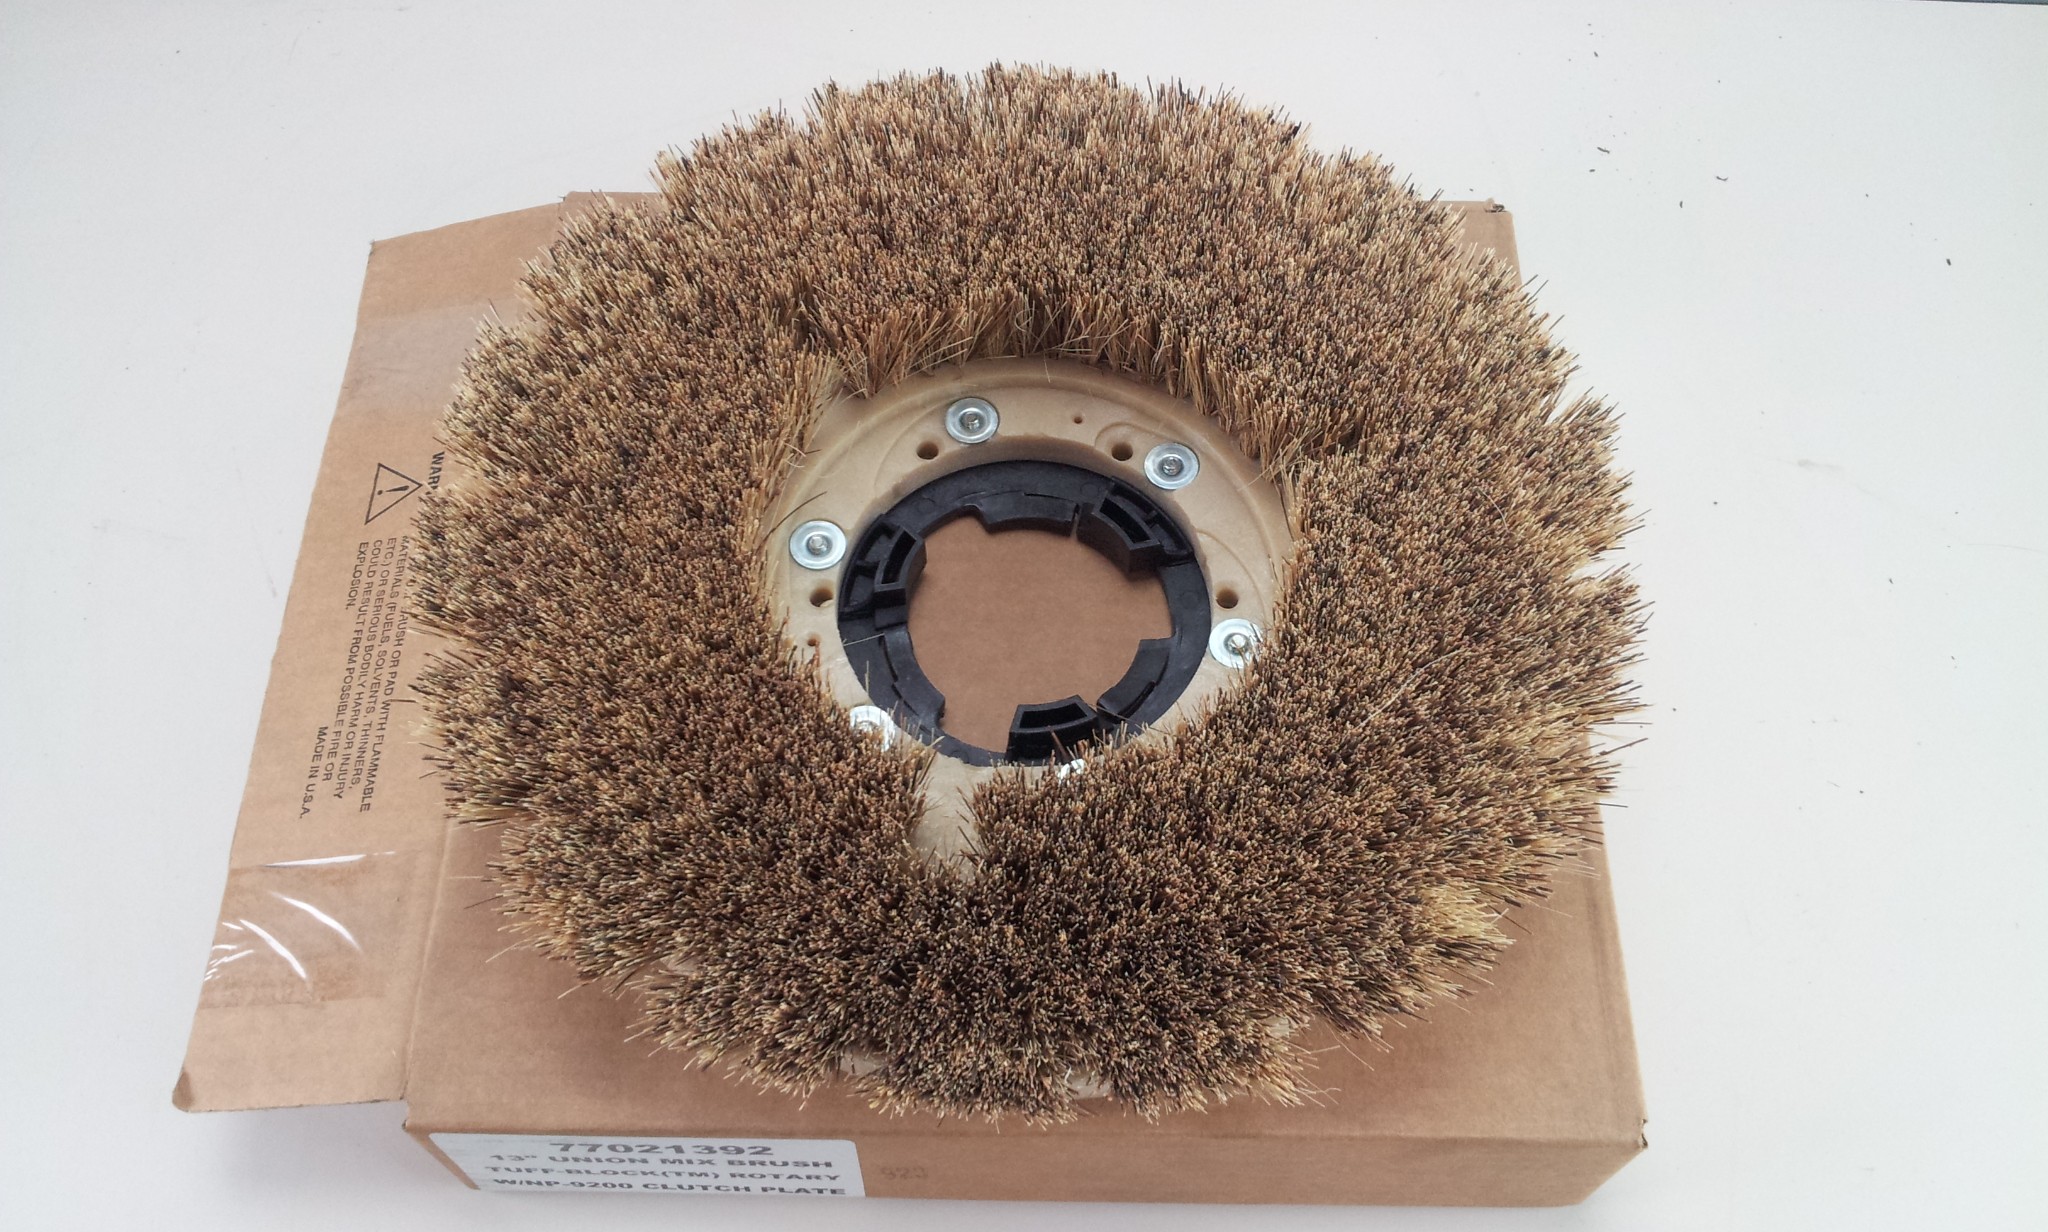 Malish 770213 13" Union Mix Floor Polisher Brush With NP-9200 Clutch Plate